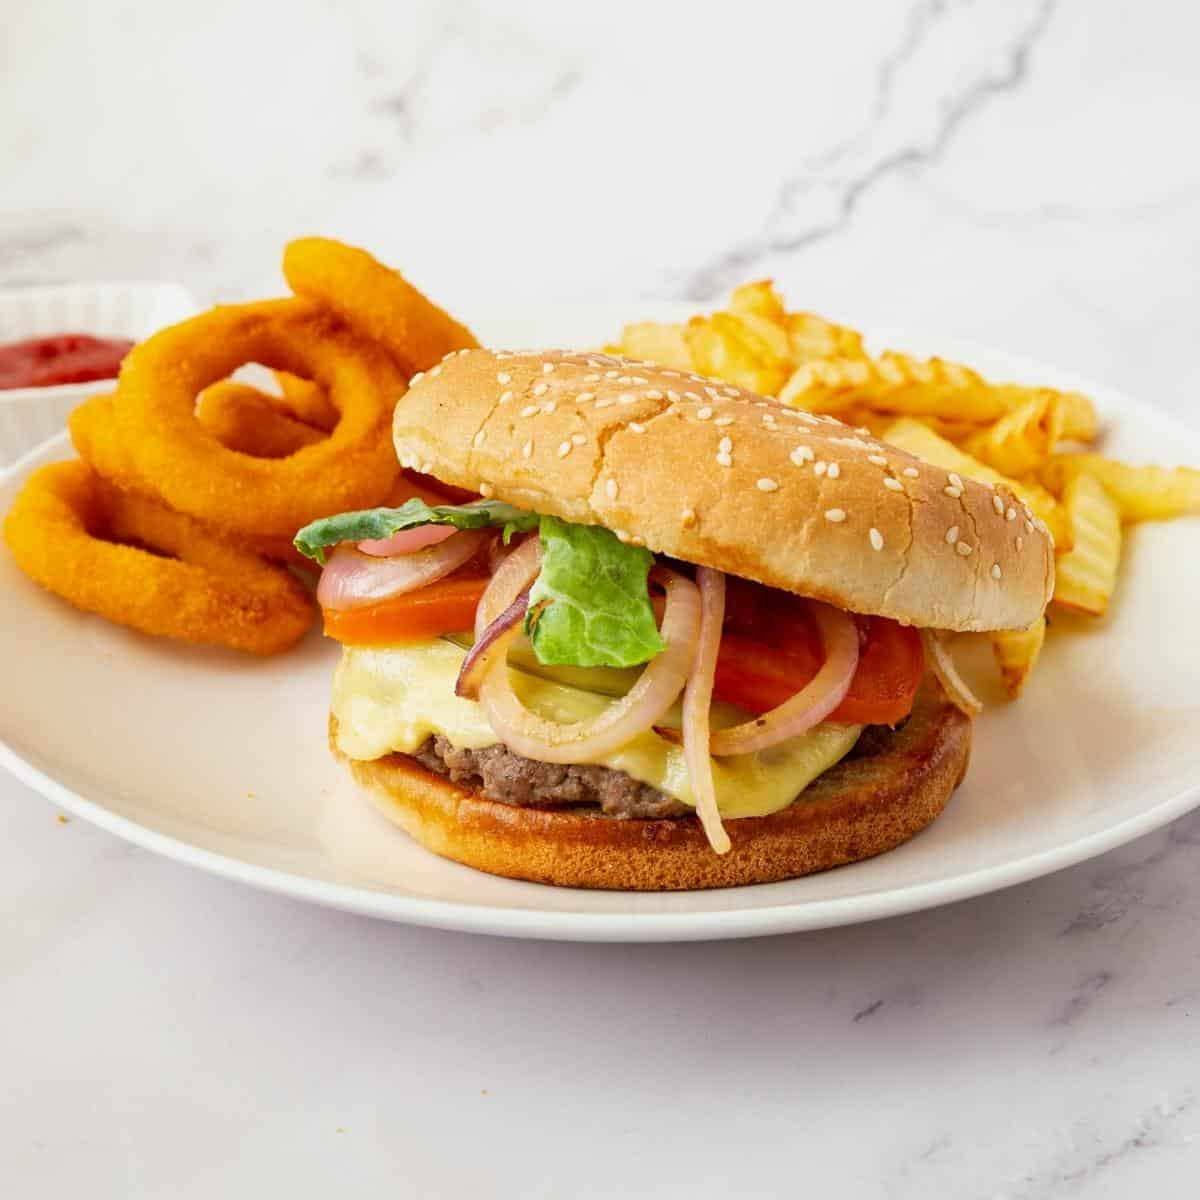 Burgers on a plate with fries and rings.